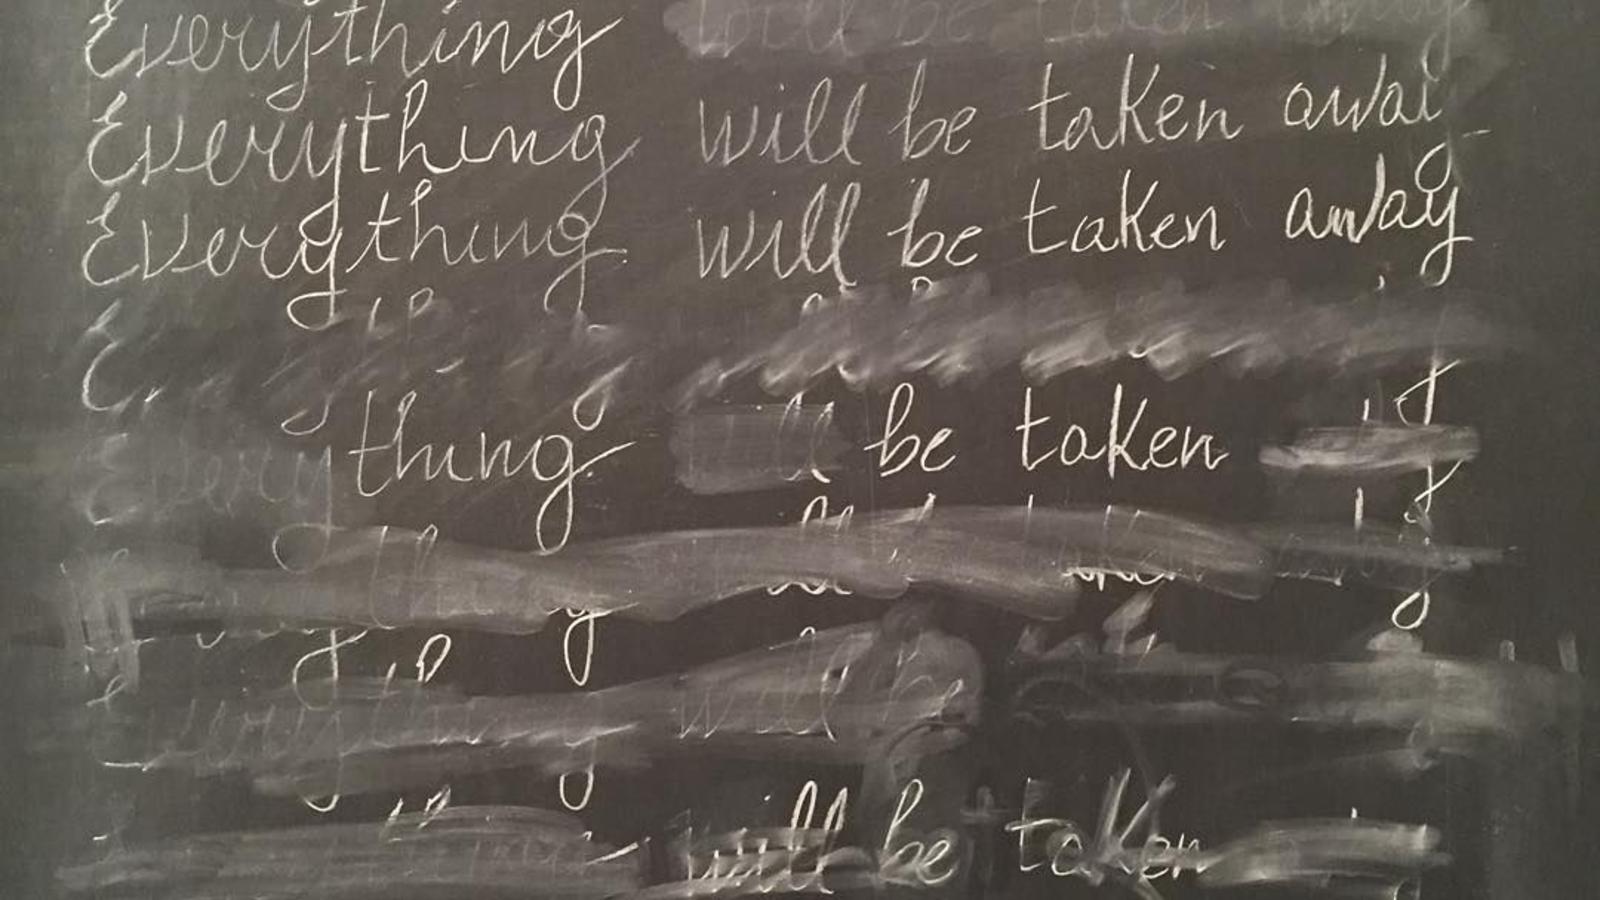 A detail from Adrian Piper's "Everything #21." It features the phrase "Everything will be taken away" written 25 times in cursive (and partially erased) on a blackboard.